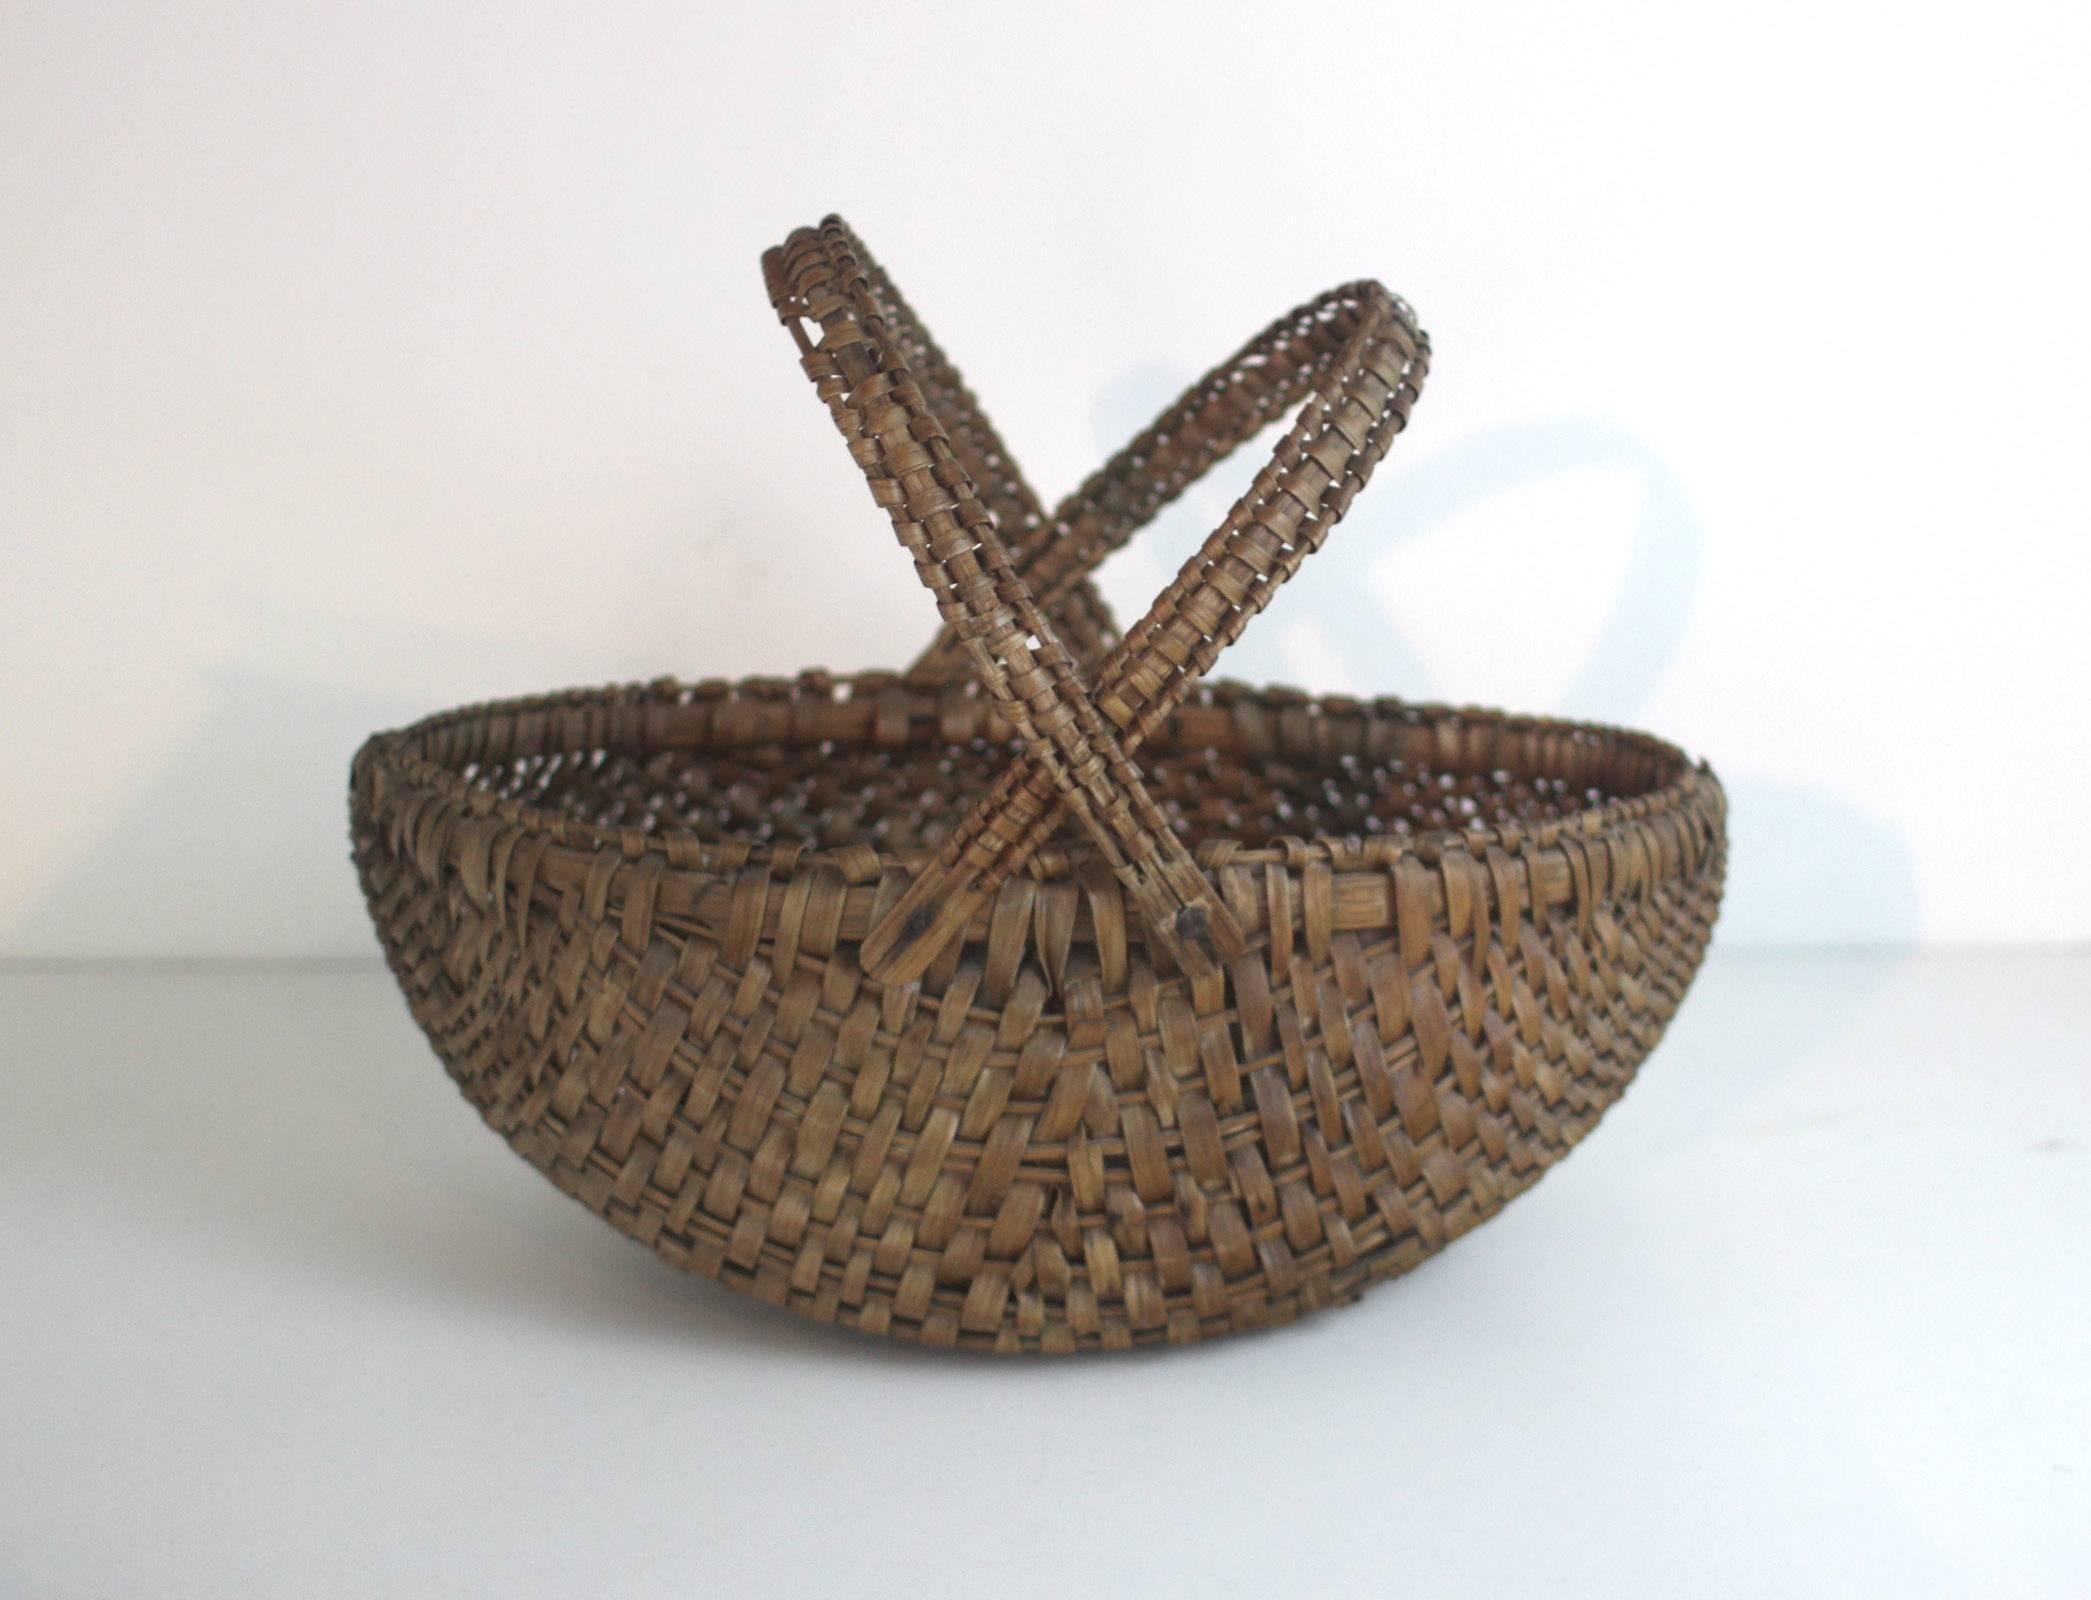 An excellent and rare form within 19th century American baskets with two swing handles and a very good ovoid shape. Warm deep nut-brown color.